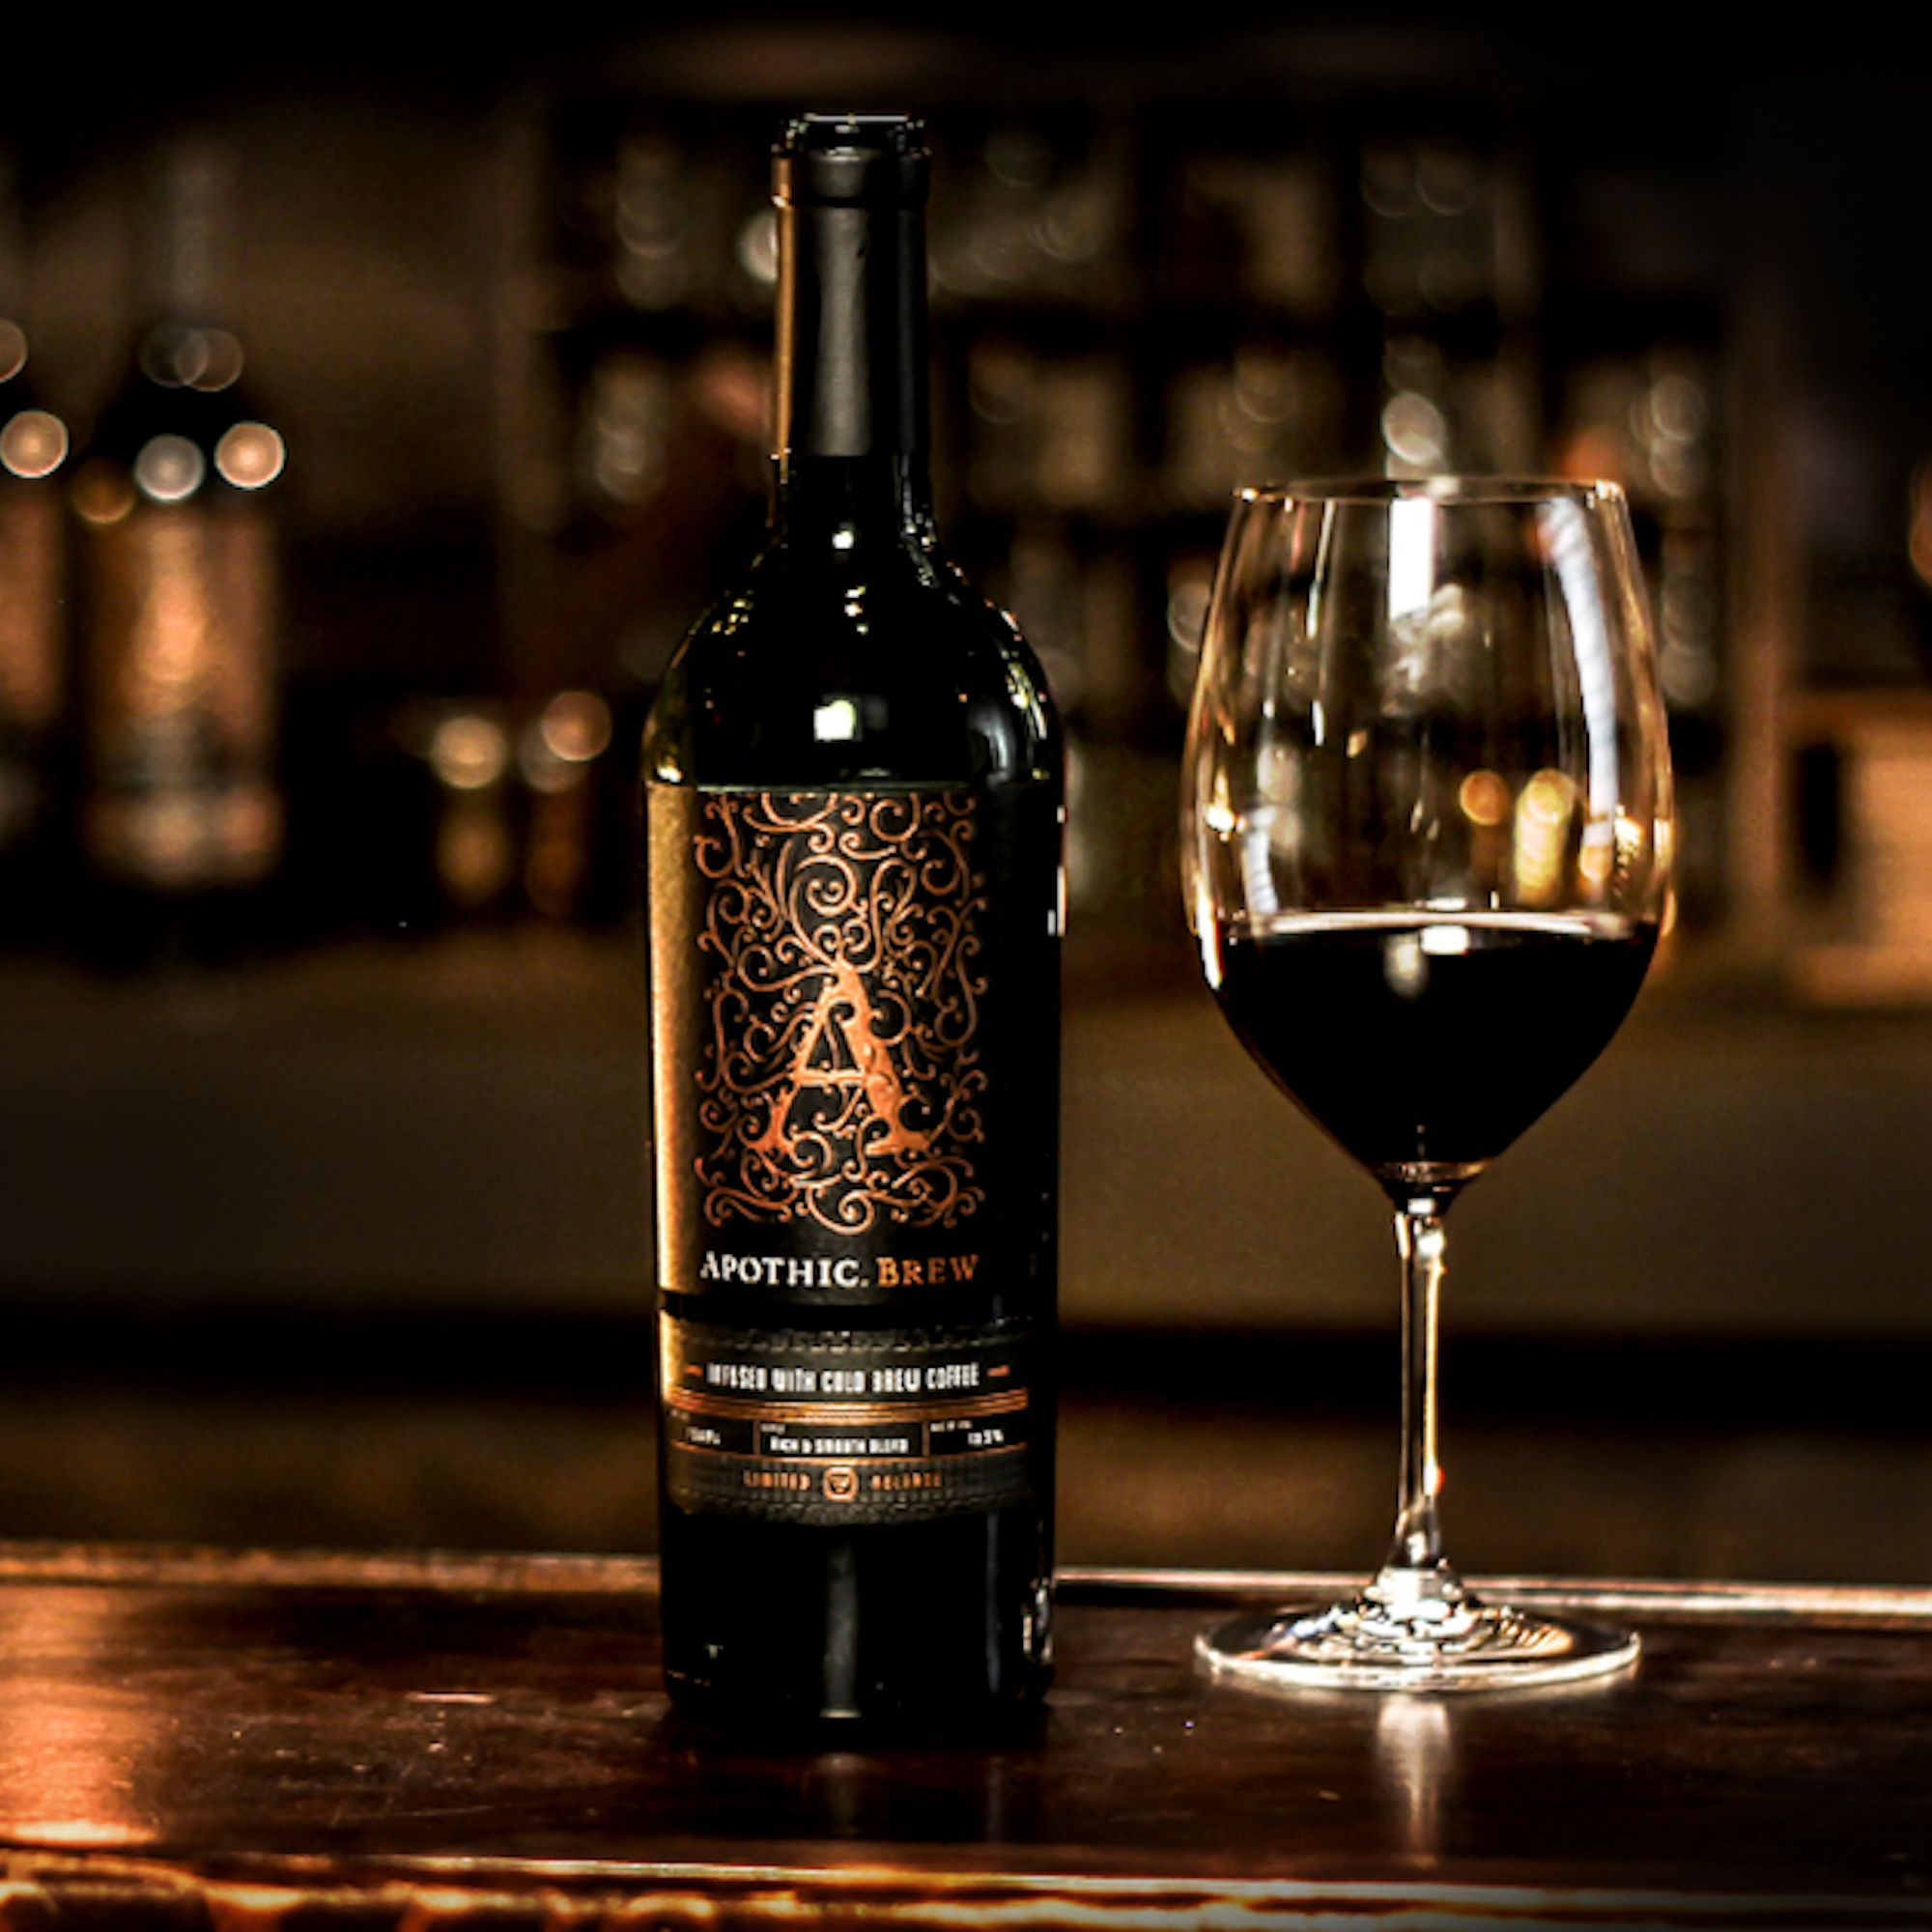 Apothic Wine offers a new type of pour